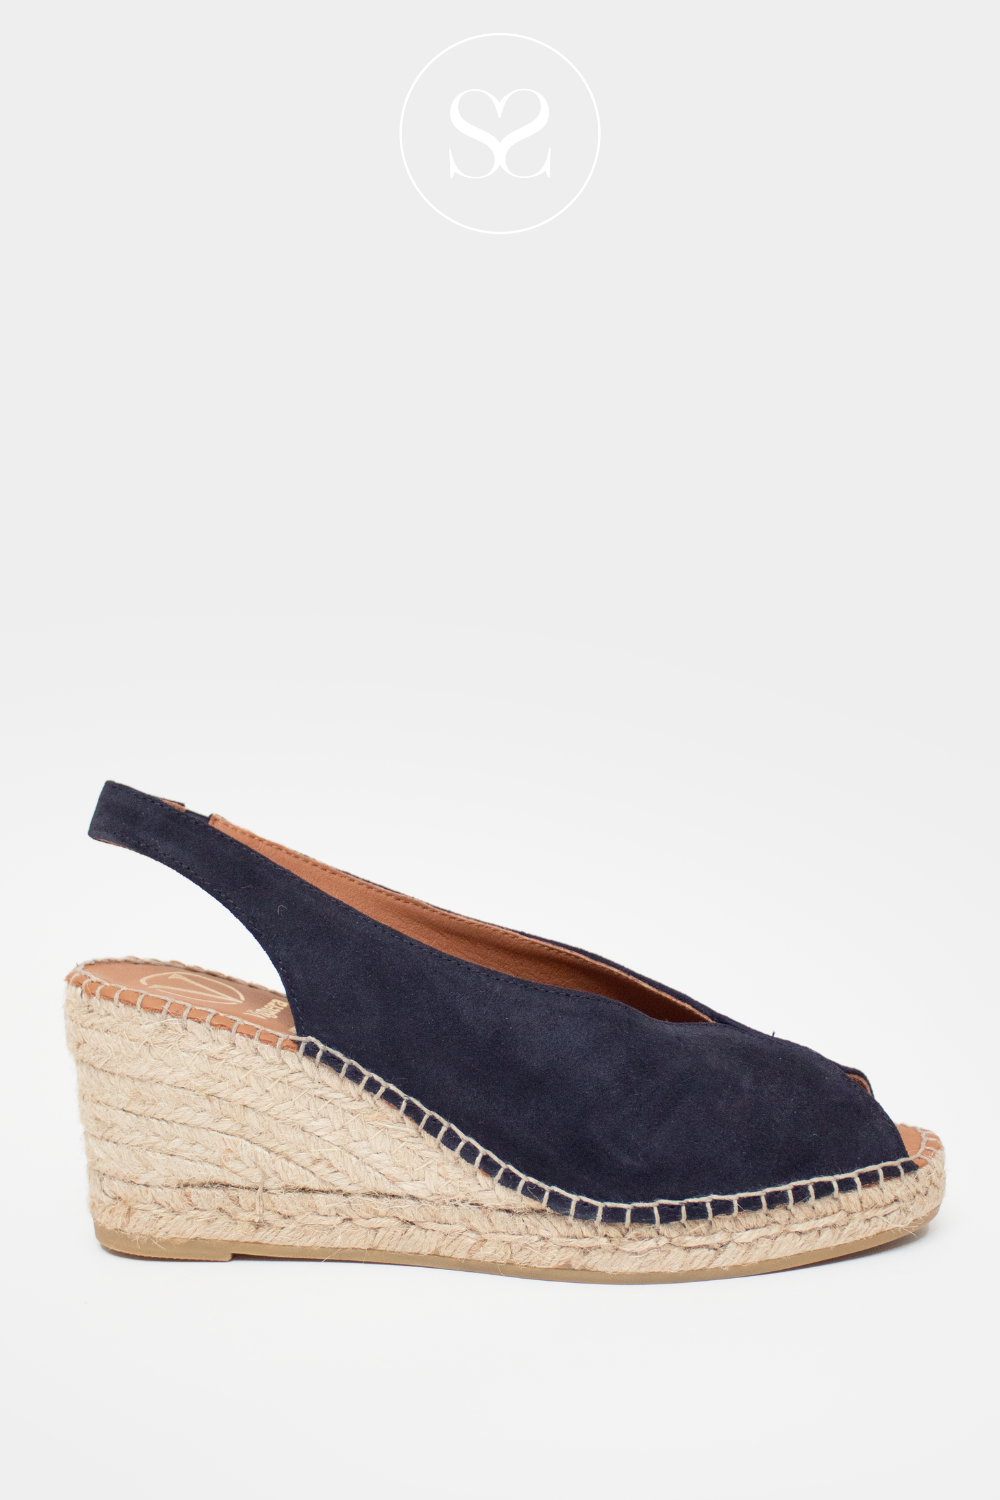 nAVY ESPADRILLE WEDGES FROM VIGUERA